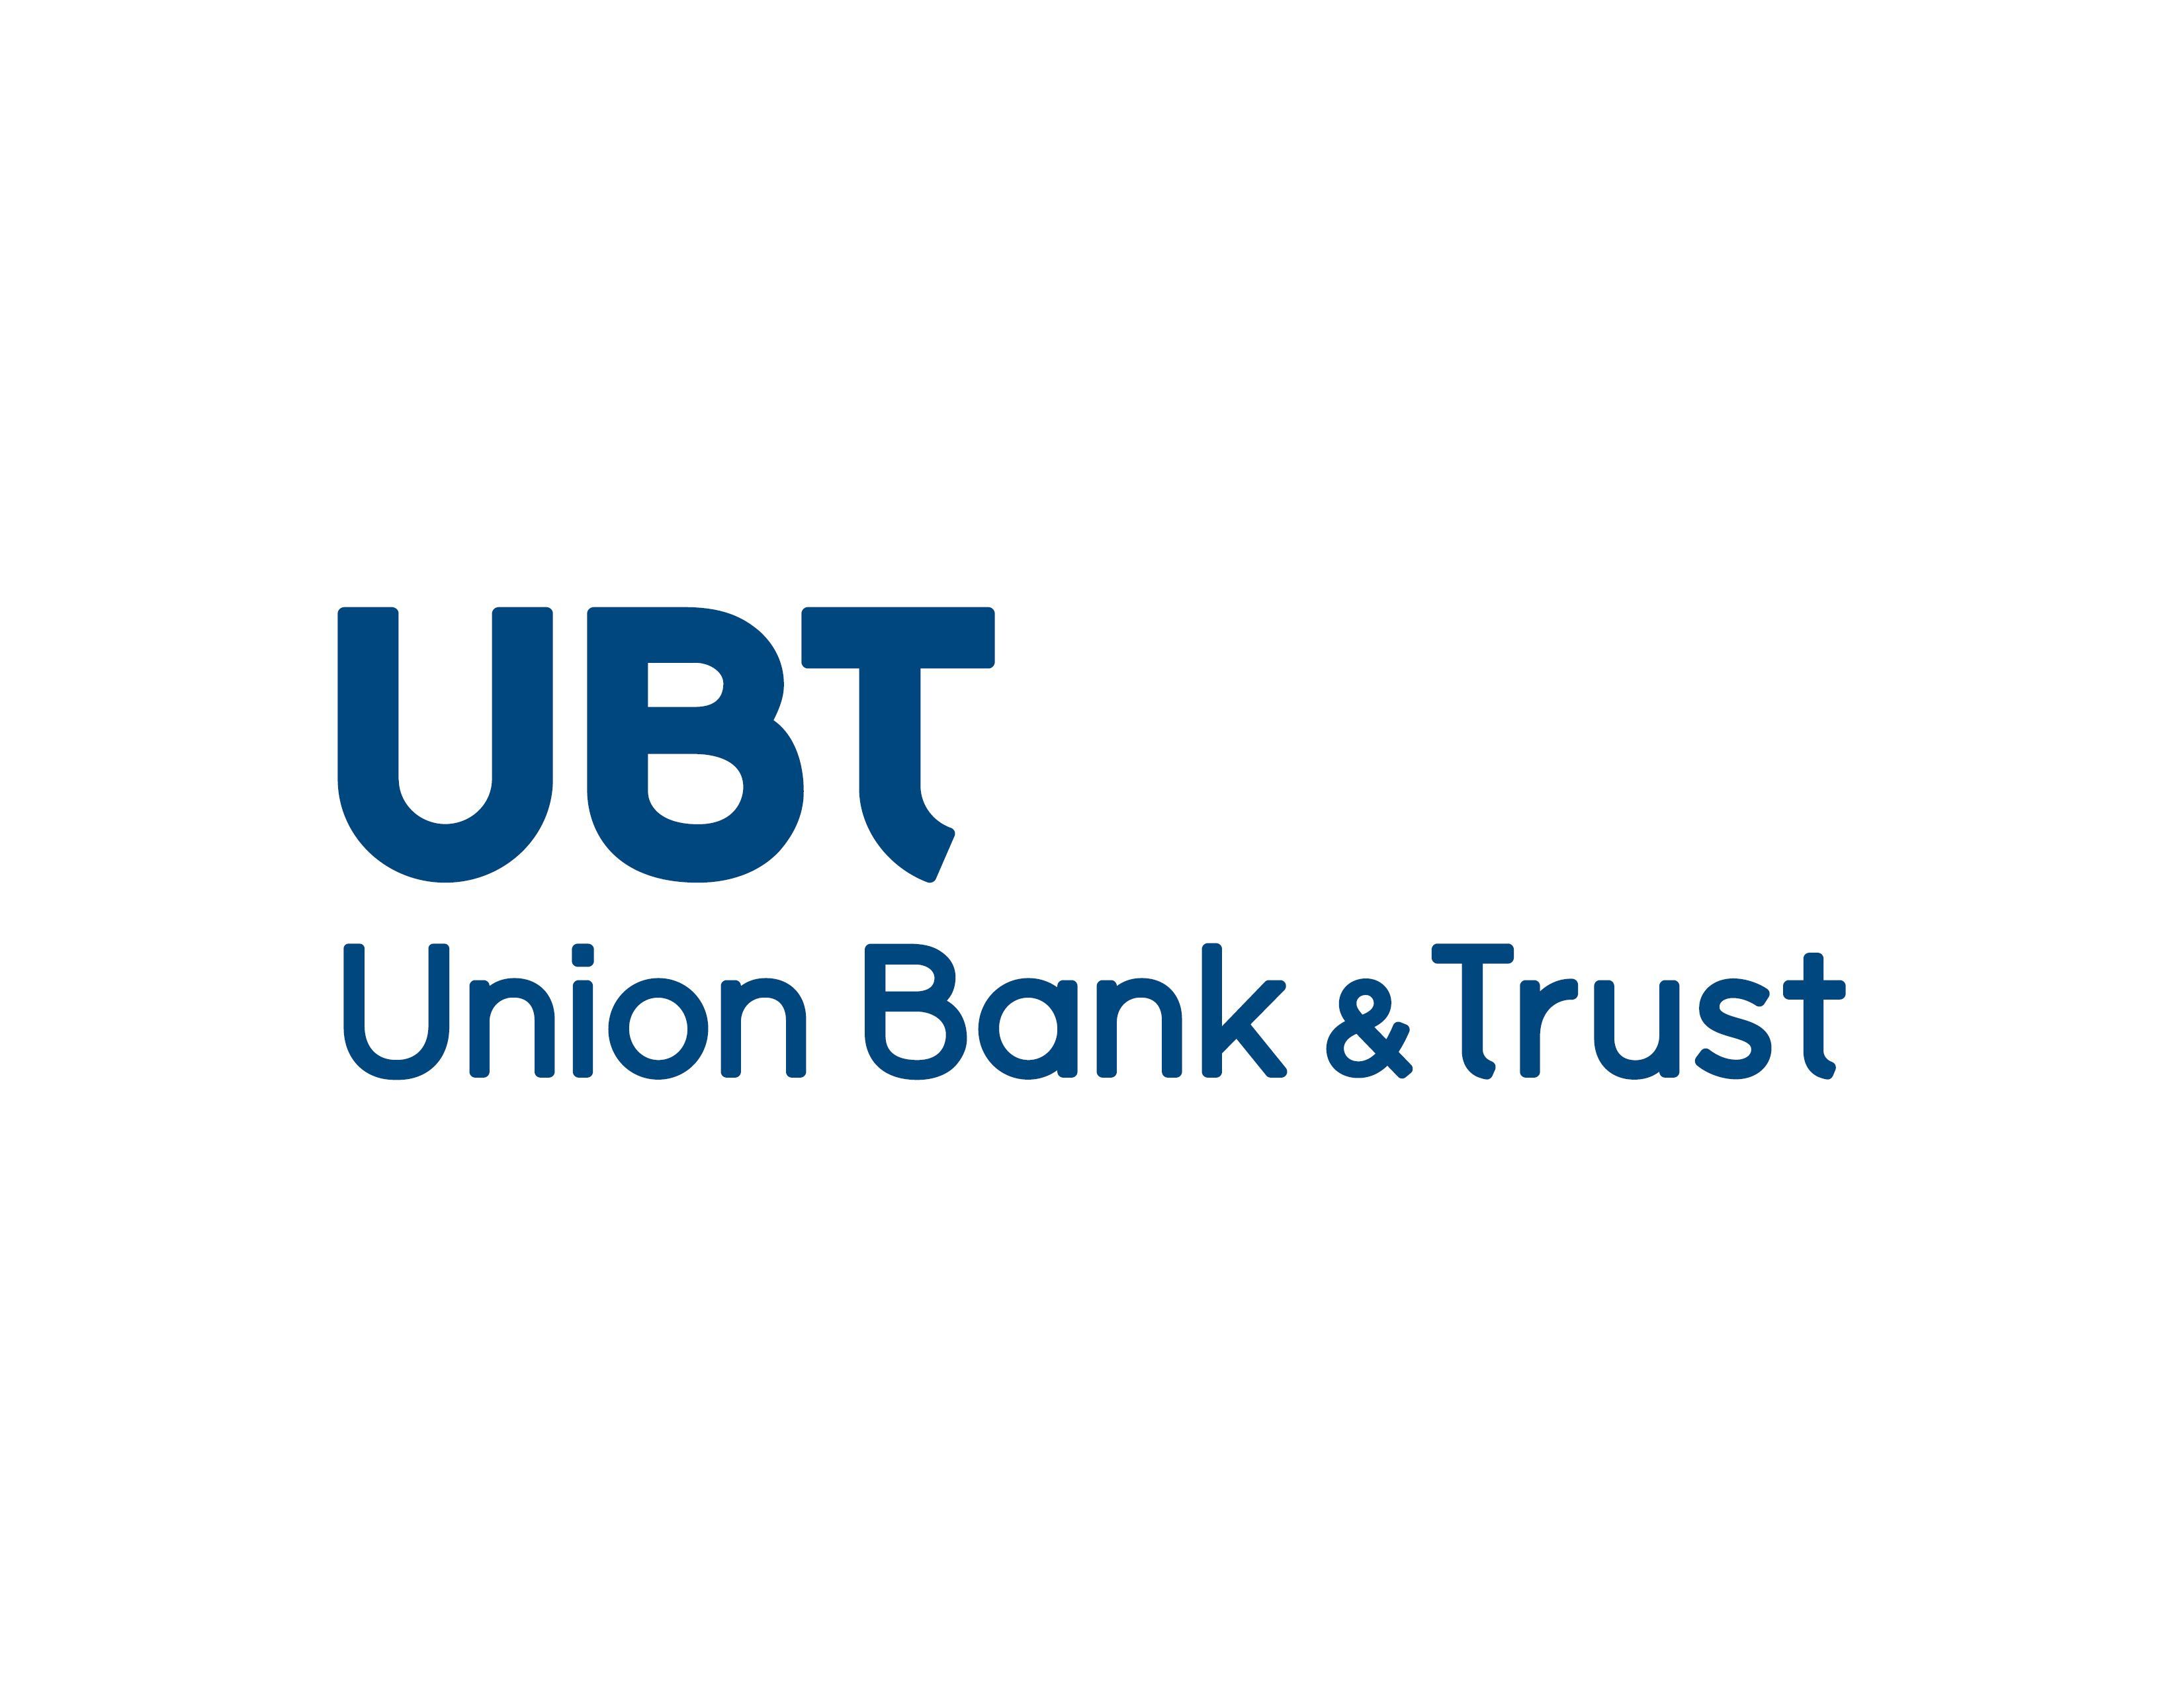 Union Bank and Trust